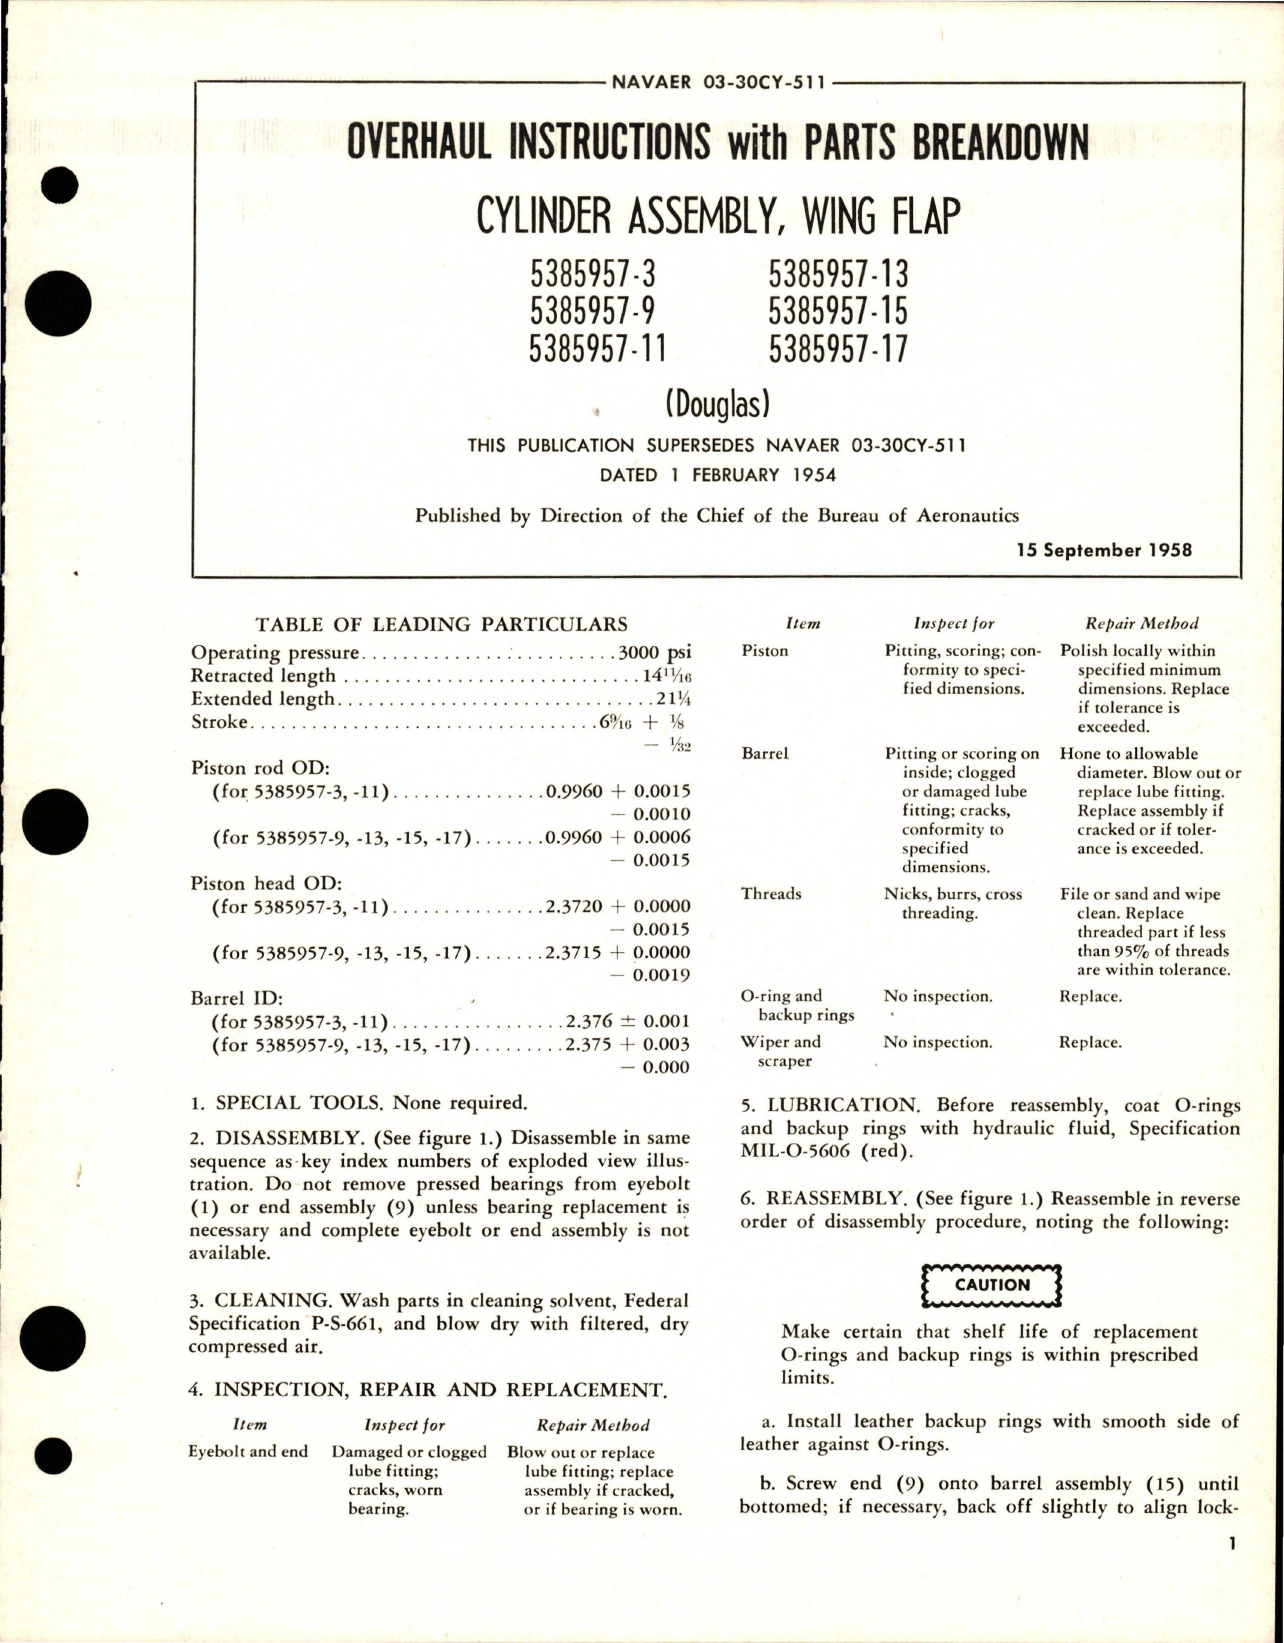 Sample page 1 from AirCorps Library document: Overhaul Instructions with Parts for Wing Flap Cylinder Assembly